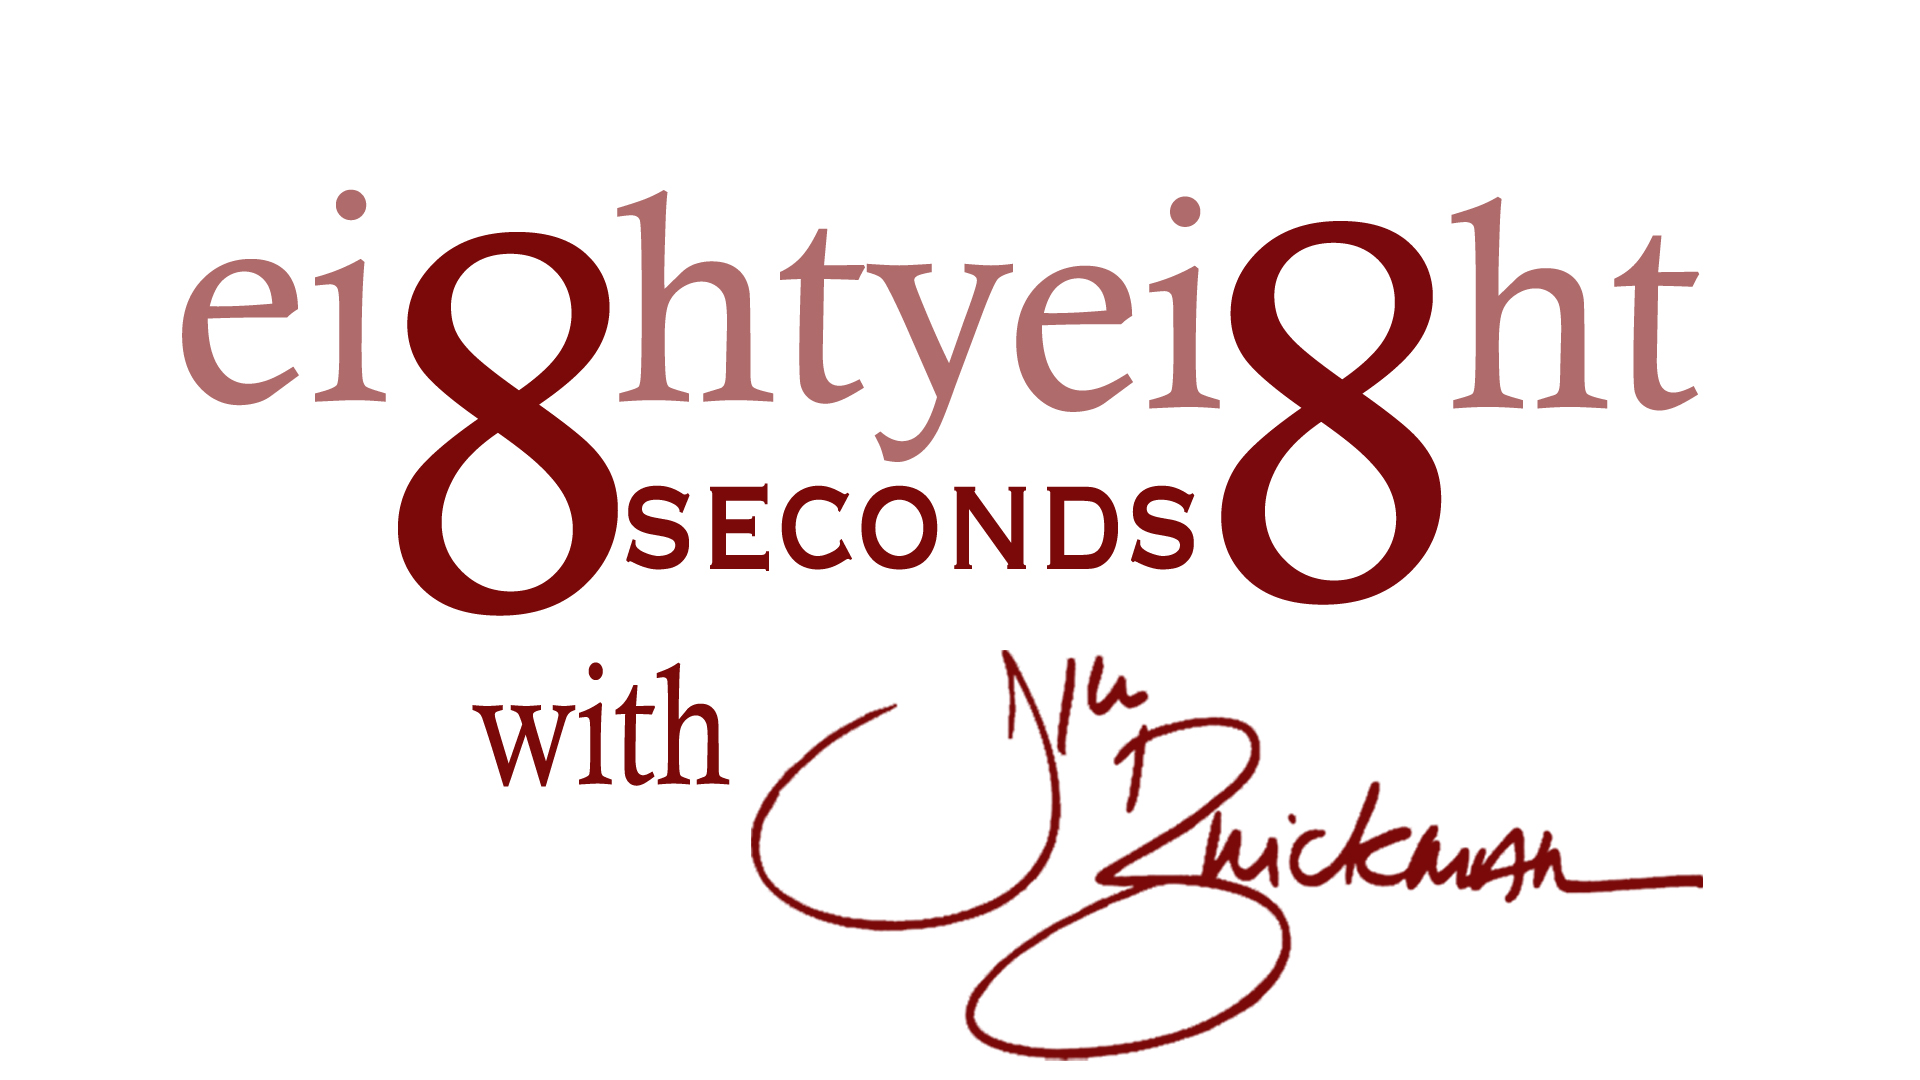 88 Seconds with Jim Brickman-This or That